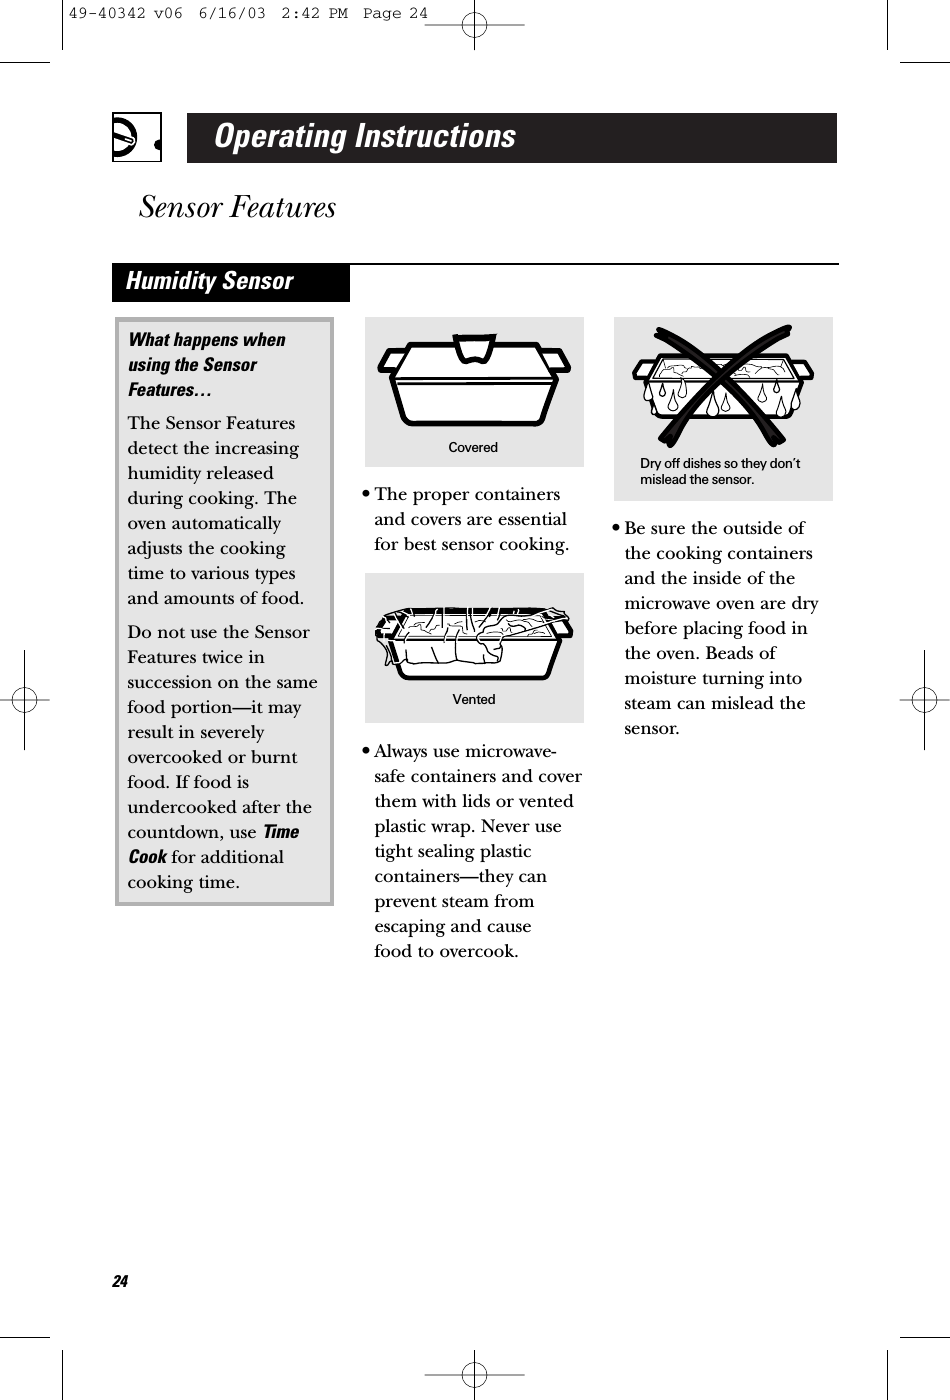 Operating InstructionsSensor Features24•The proper containersand covers are essentialfor best sensor cooking.•Always use microwave-safe containers and coverthem with lids or ventedplastic wrap. Never usetight sealing plasticcontainers—they canprevent steam fromescaping and cause food to overcook.•Be sure the outside of the cooking containersand the inside of themicrowave oven are drybefore placing food inthe oven. Beads ofmoisture turning intosteam can mislead thesensor.What happens when using the SensorFeatures…The Sensor Featuresdetect the increasinghumidity releasedduring cooking. Theoven automaticallyadjusts the cookingtime to various typesand amounts of food.Do not use the SensorFeatures twice insuccession on the samefood portion—it mayresult in severelyovercooked or burntfood. If food isundercooked after thecountdown, use TimeCook for additionalcooking time.Humidity SensorDry off dishes so they don’tmislead the sensor.Vented Covered49-40342 v06  6/16/03  2:42 PM  Page 24